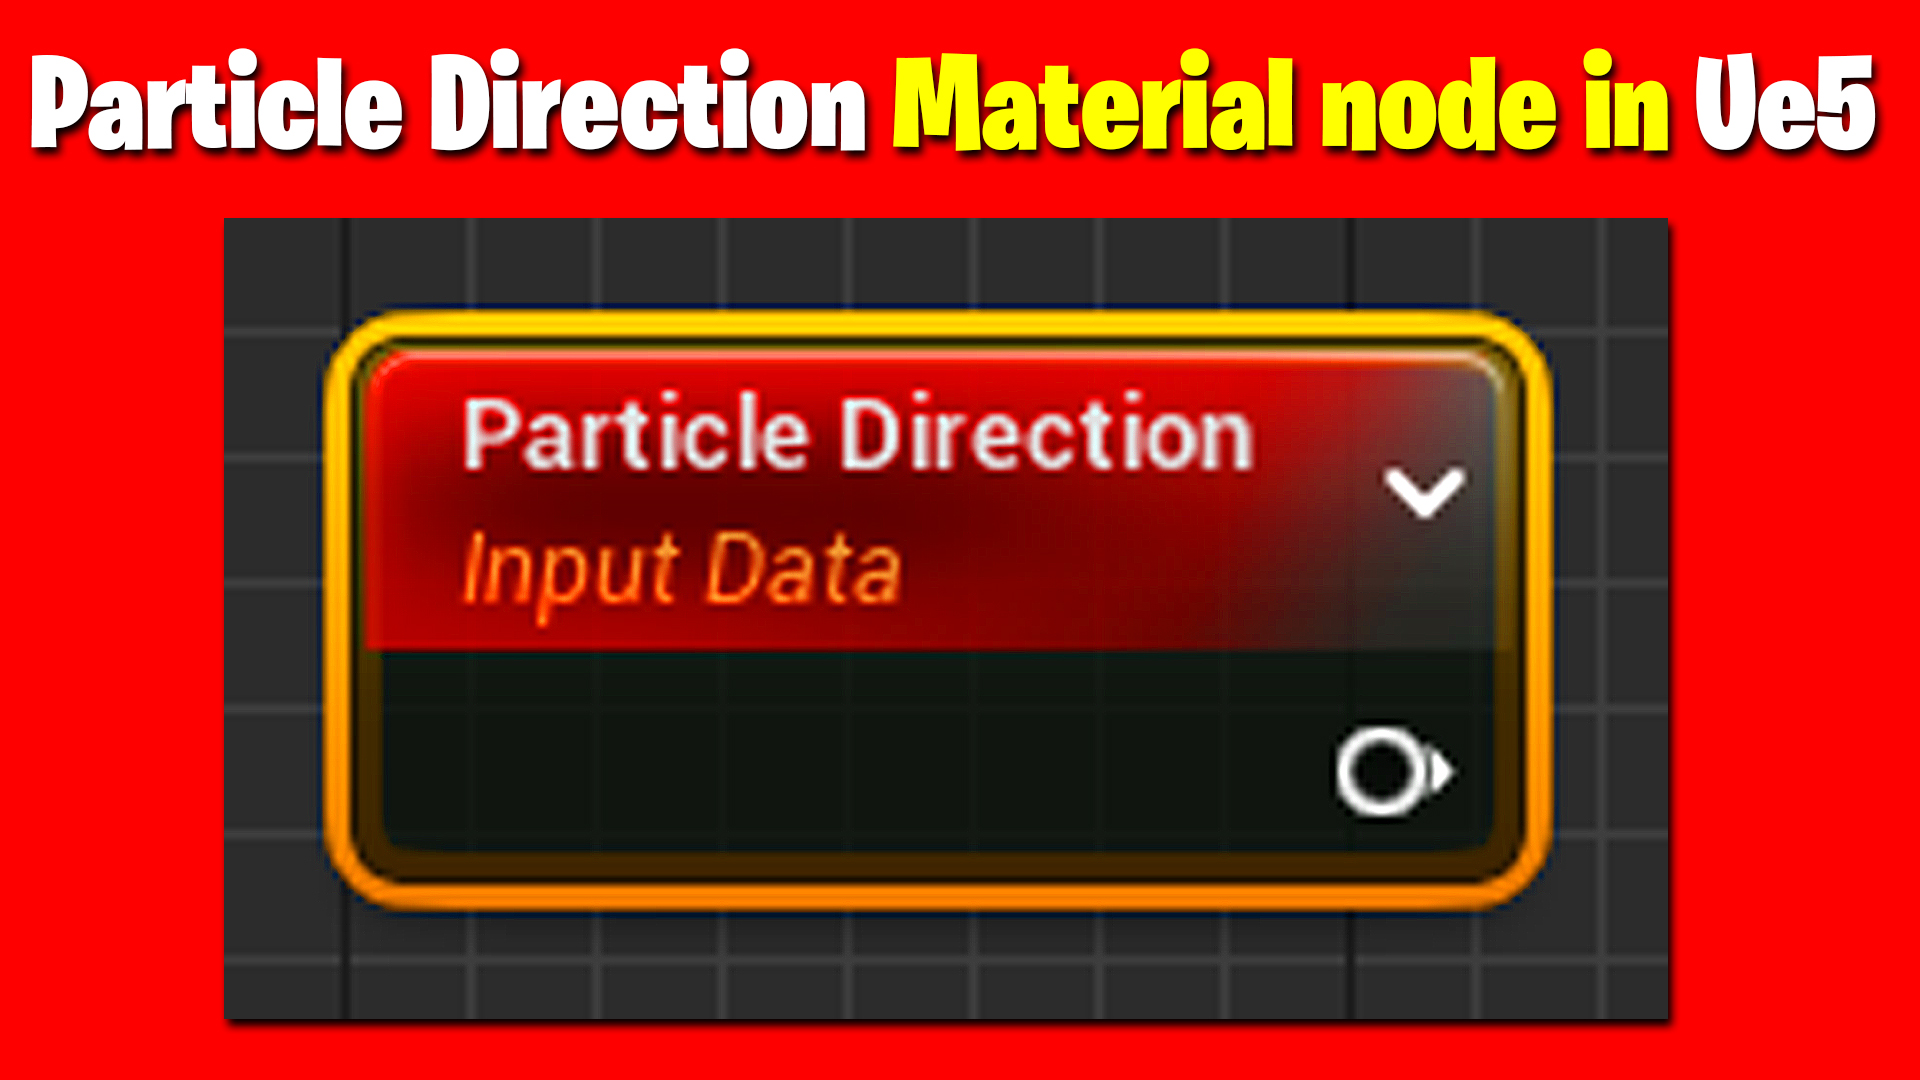 Particle Direction Material node in Ue5.jpg